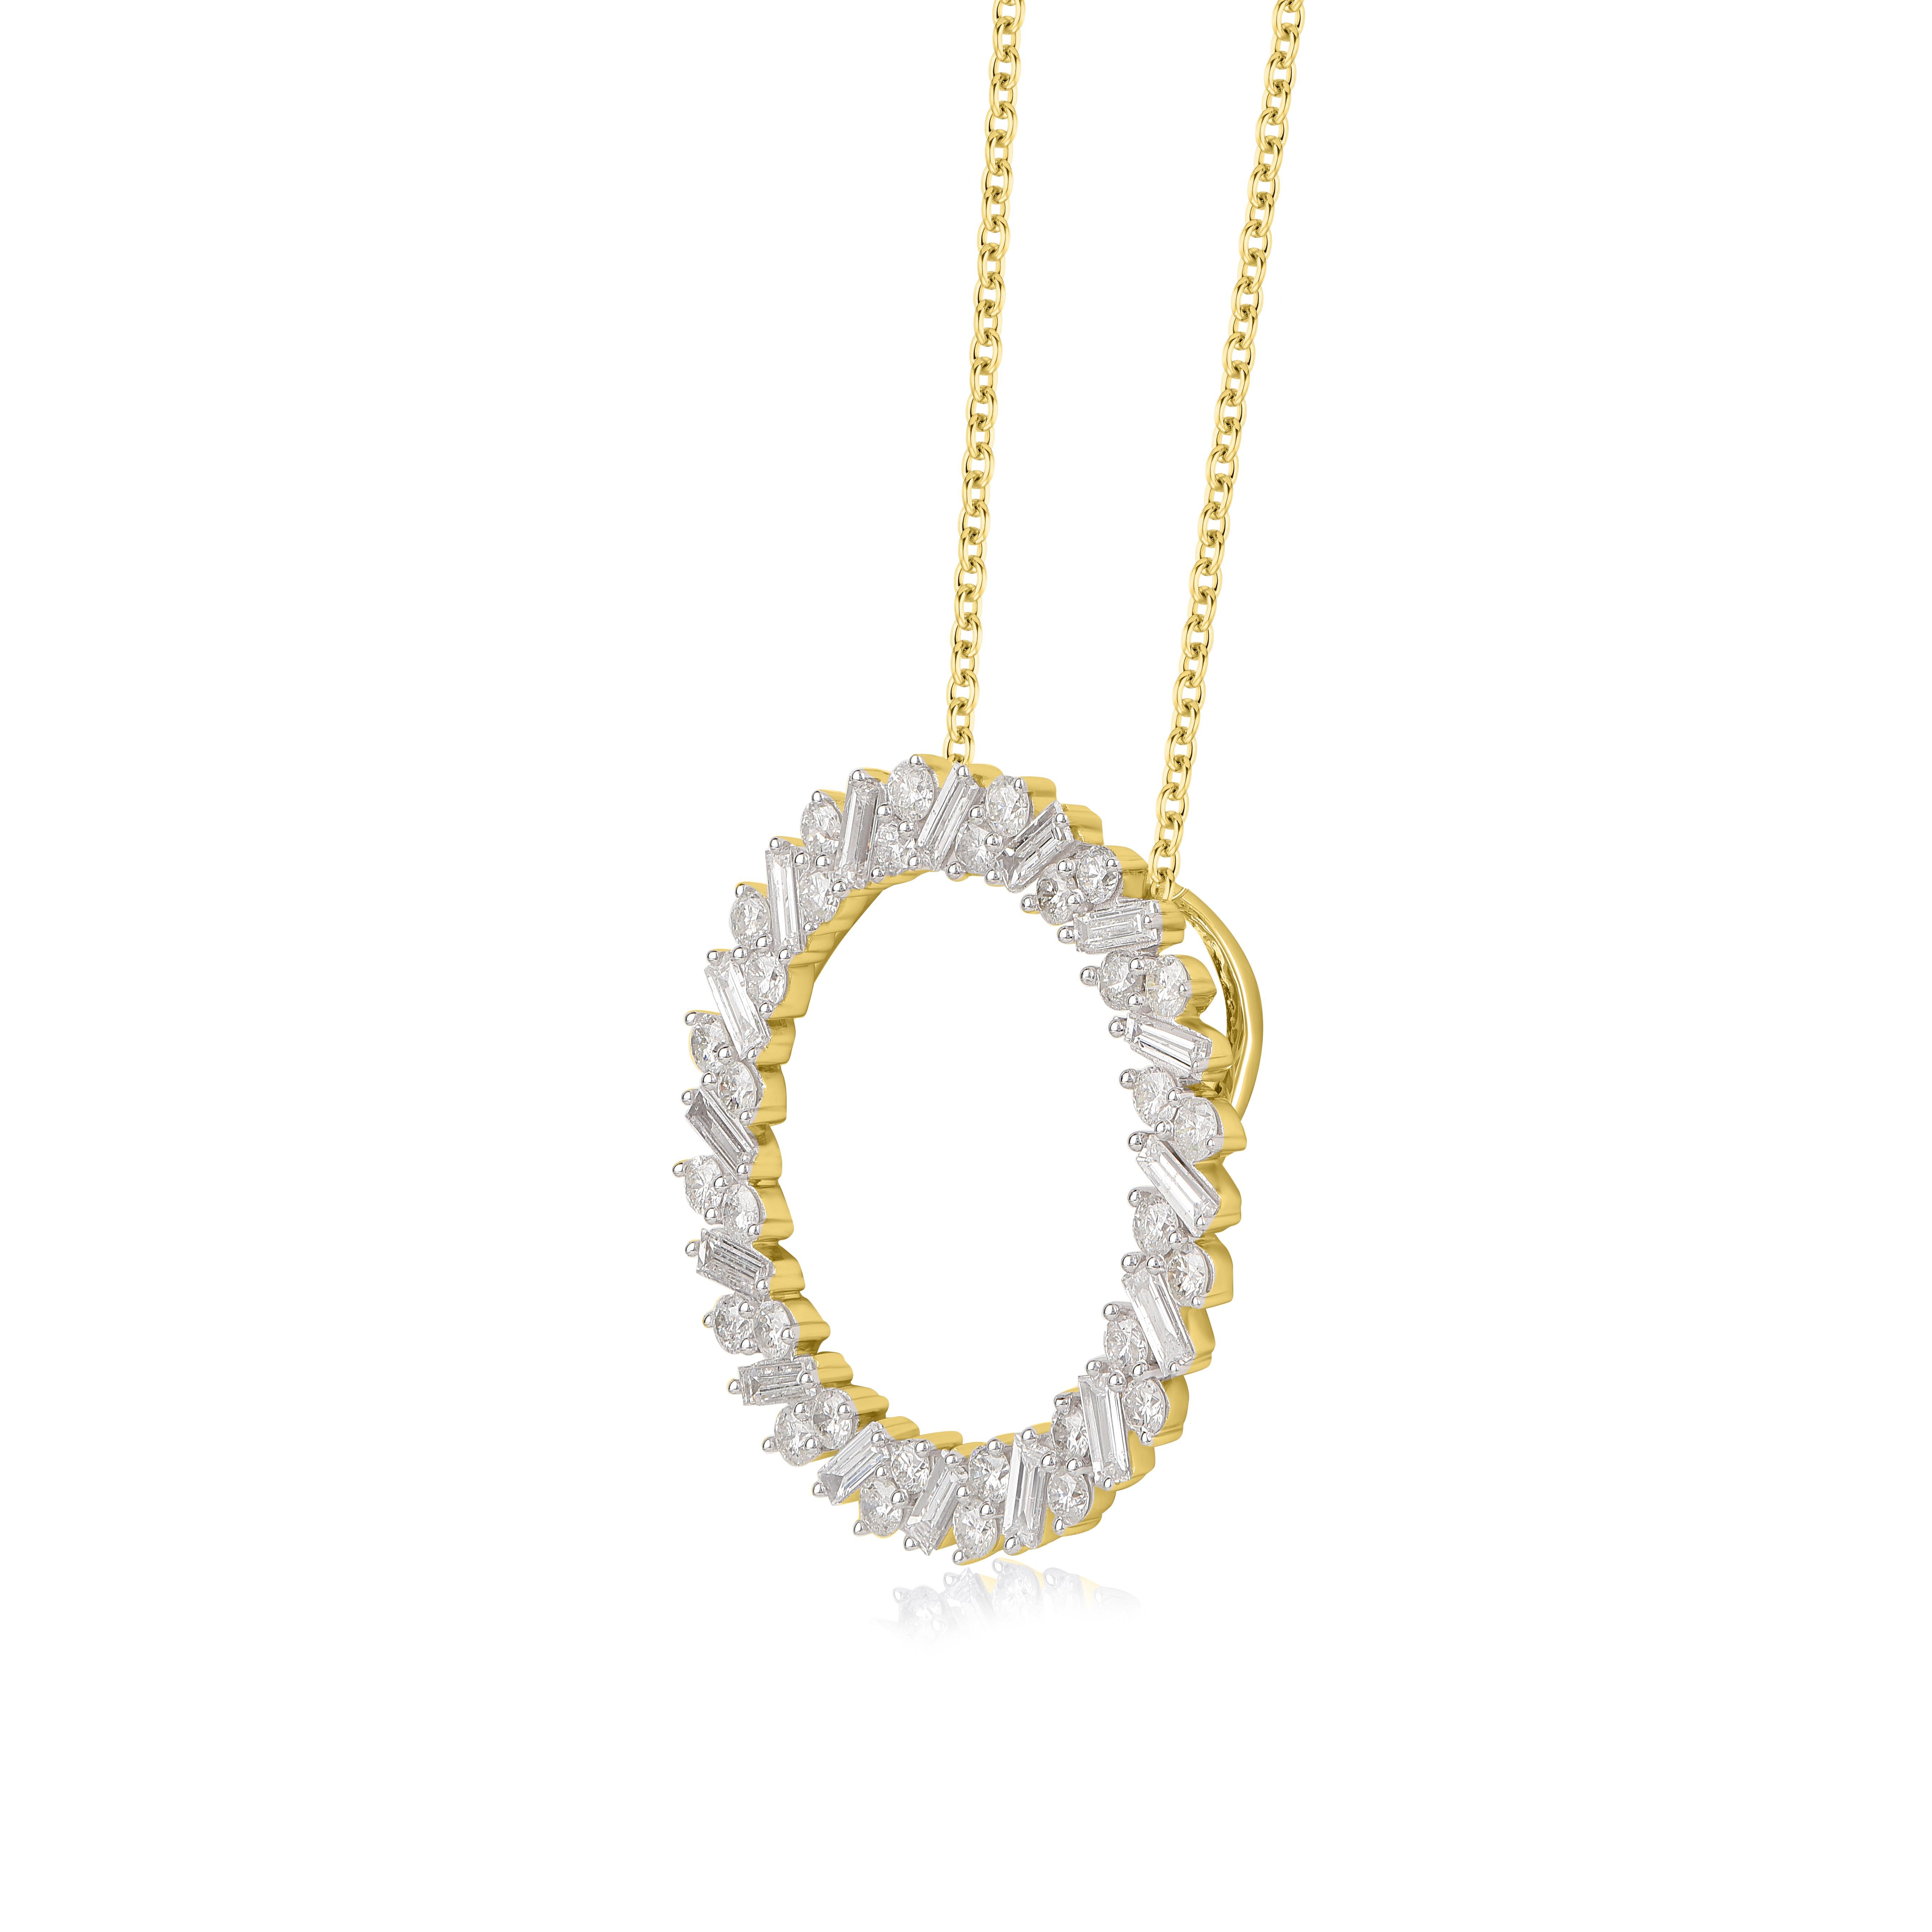 A striking addition when worn on its own, this diamond pendant makes a stunning impression. This circle pendant is crafted from 14-karat yellow gold and features 48 brilliant cut and baguette diamonds set in prong setting. H-I color I2 clarity and a